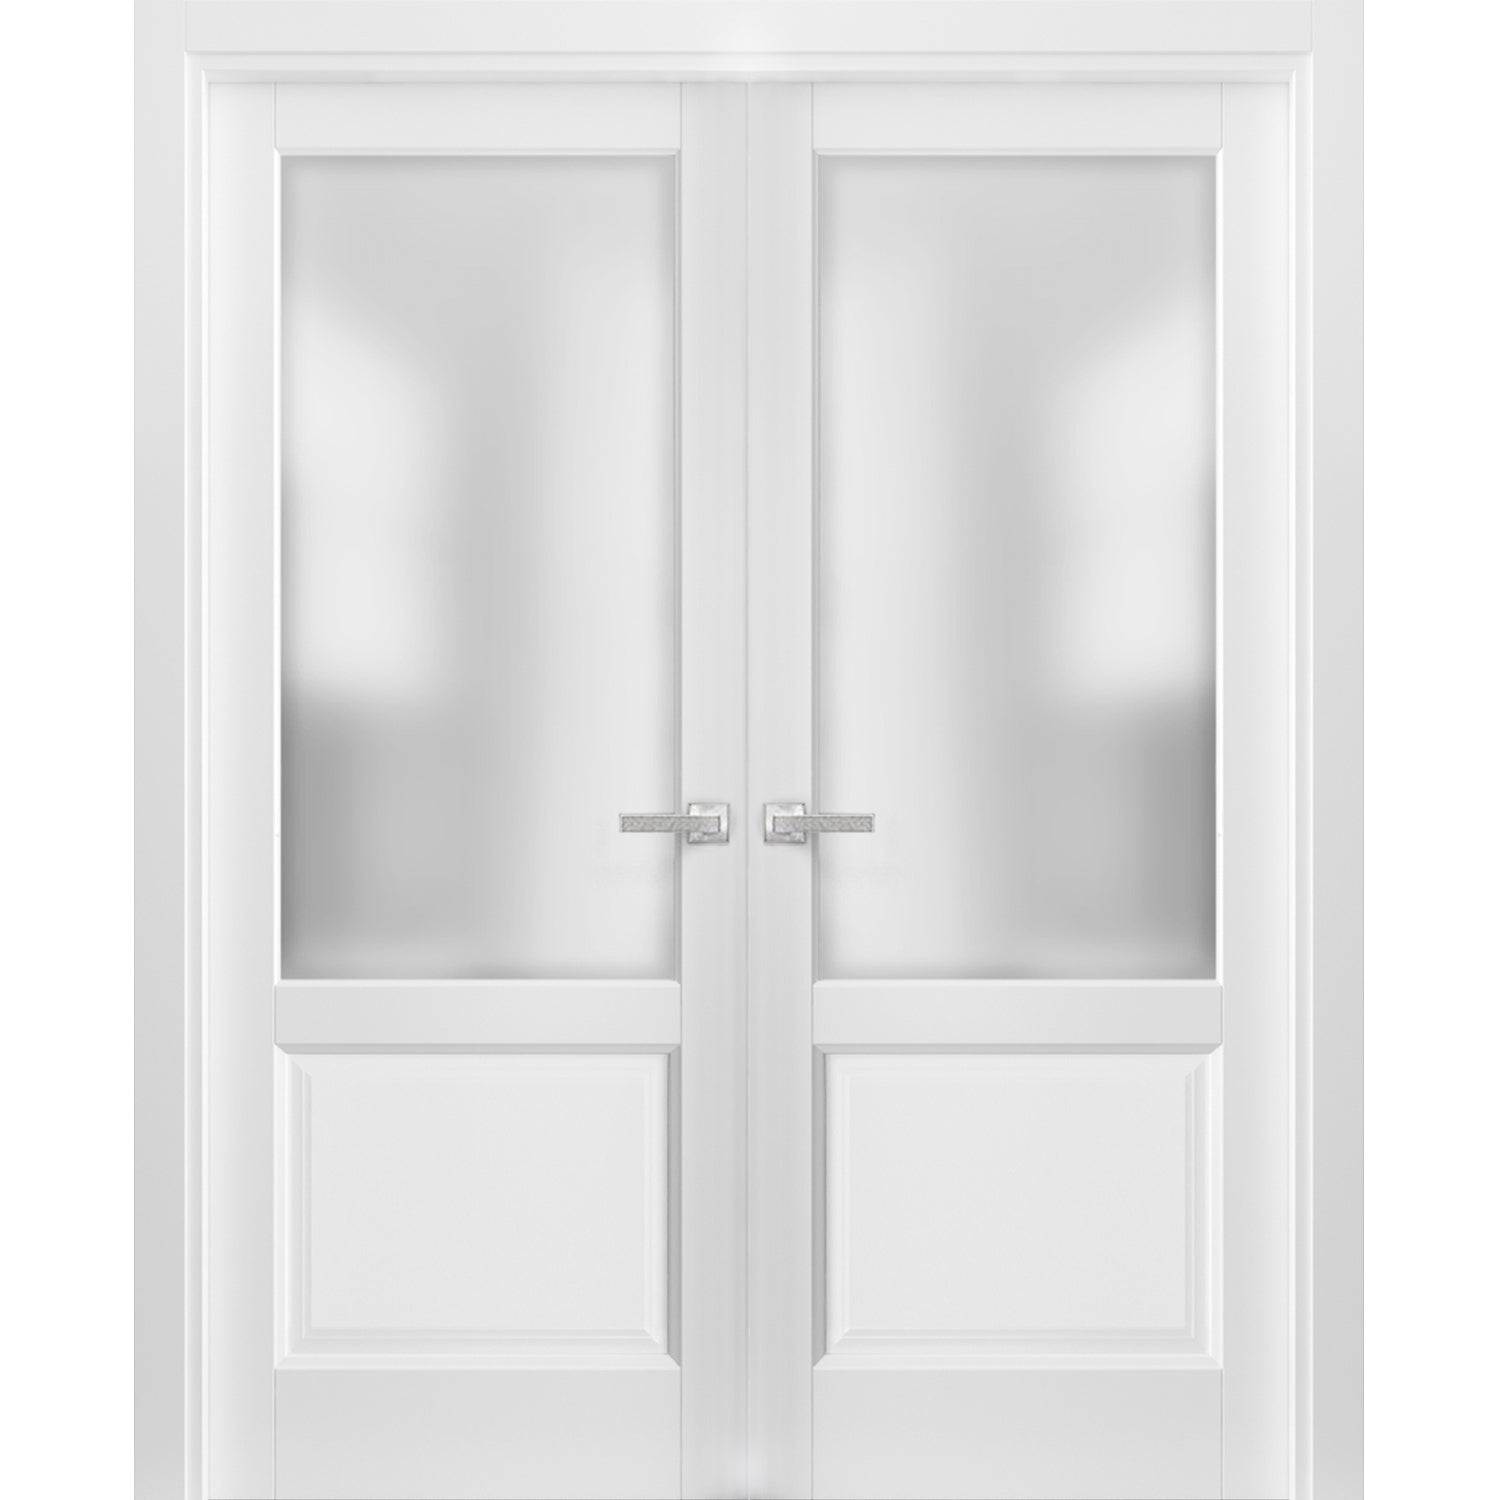 SARTODOORS French Double Panel Lite Doors 72 x 84 with Hardware | Lucia 22 Matte White with Glass | Pre-hung Panel Frame | Door